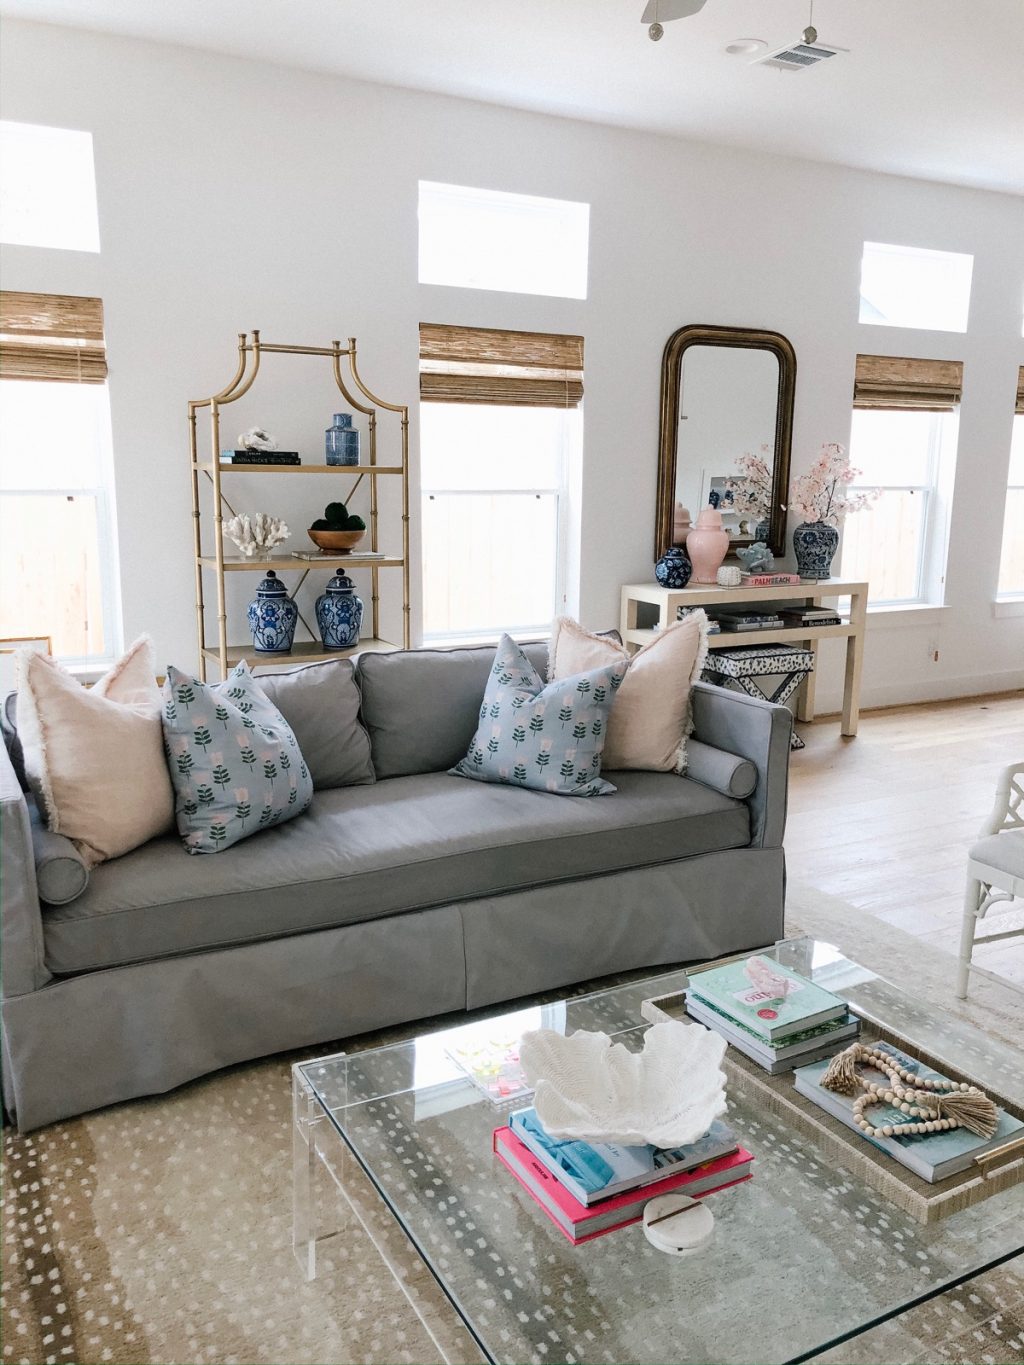 Design At Home: How to Hang Mirrors & Art with Oyster Creek Studios ...